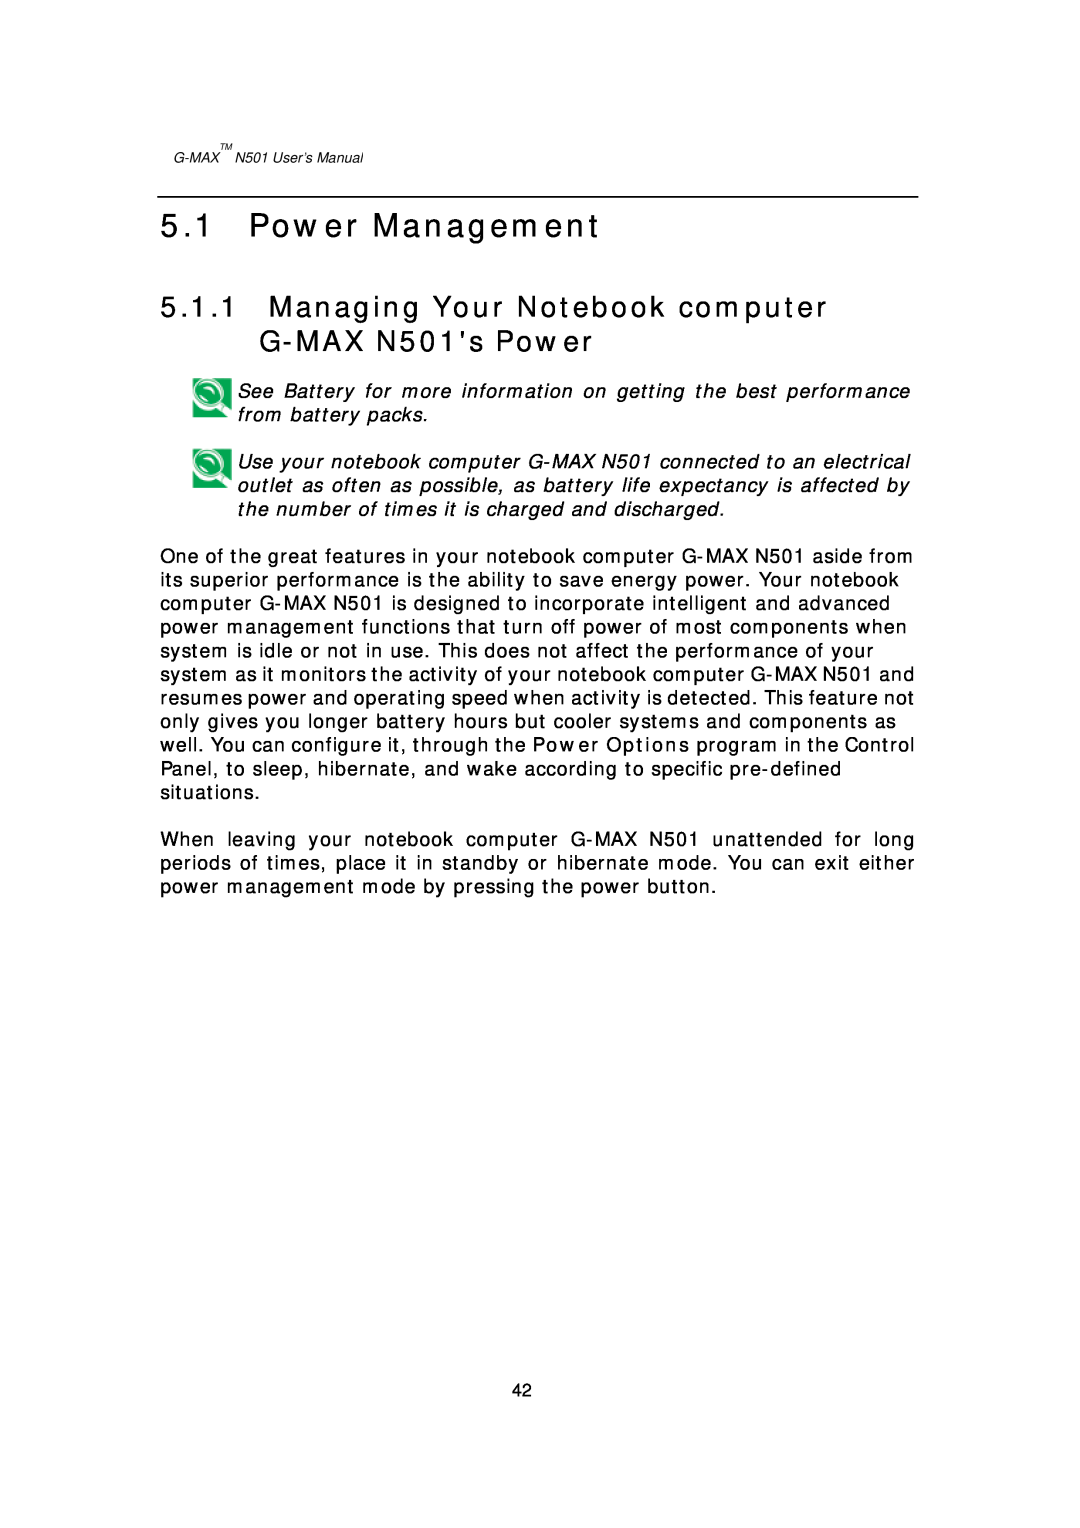 Gigabyte user manual Power Management, Managing Your Notebook computer G-MAX N501s Power 